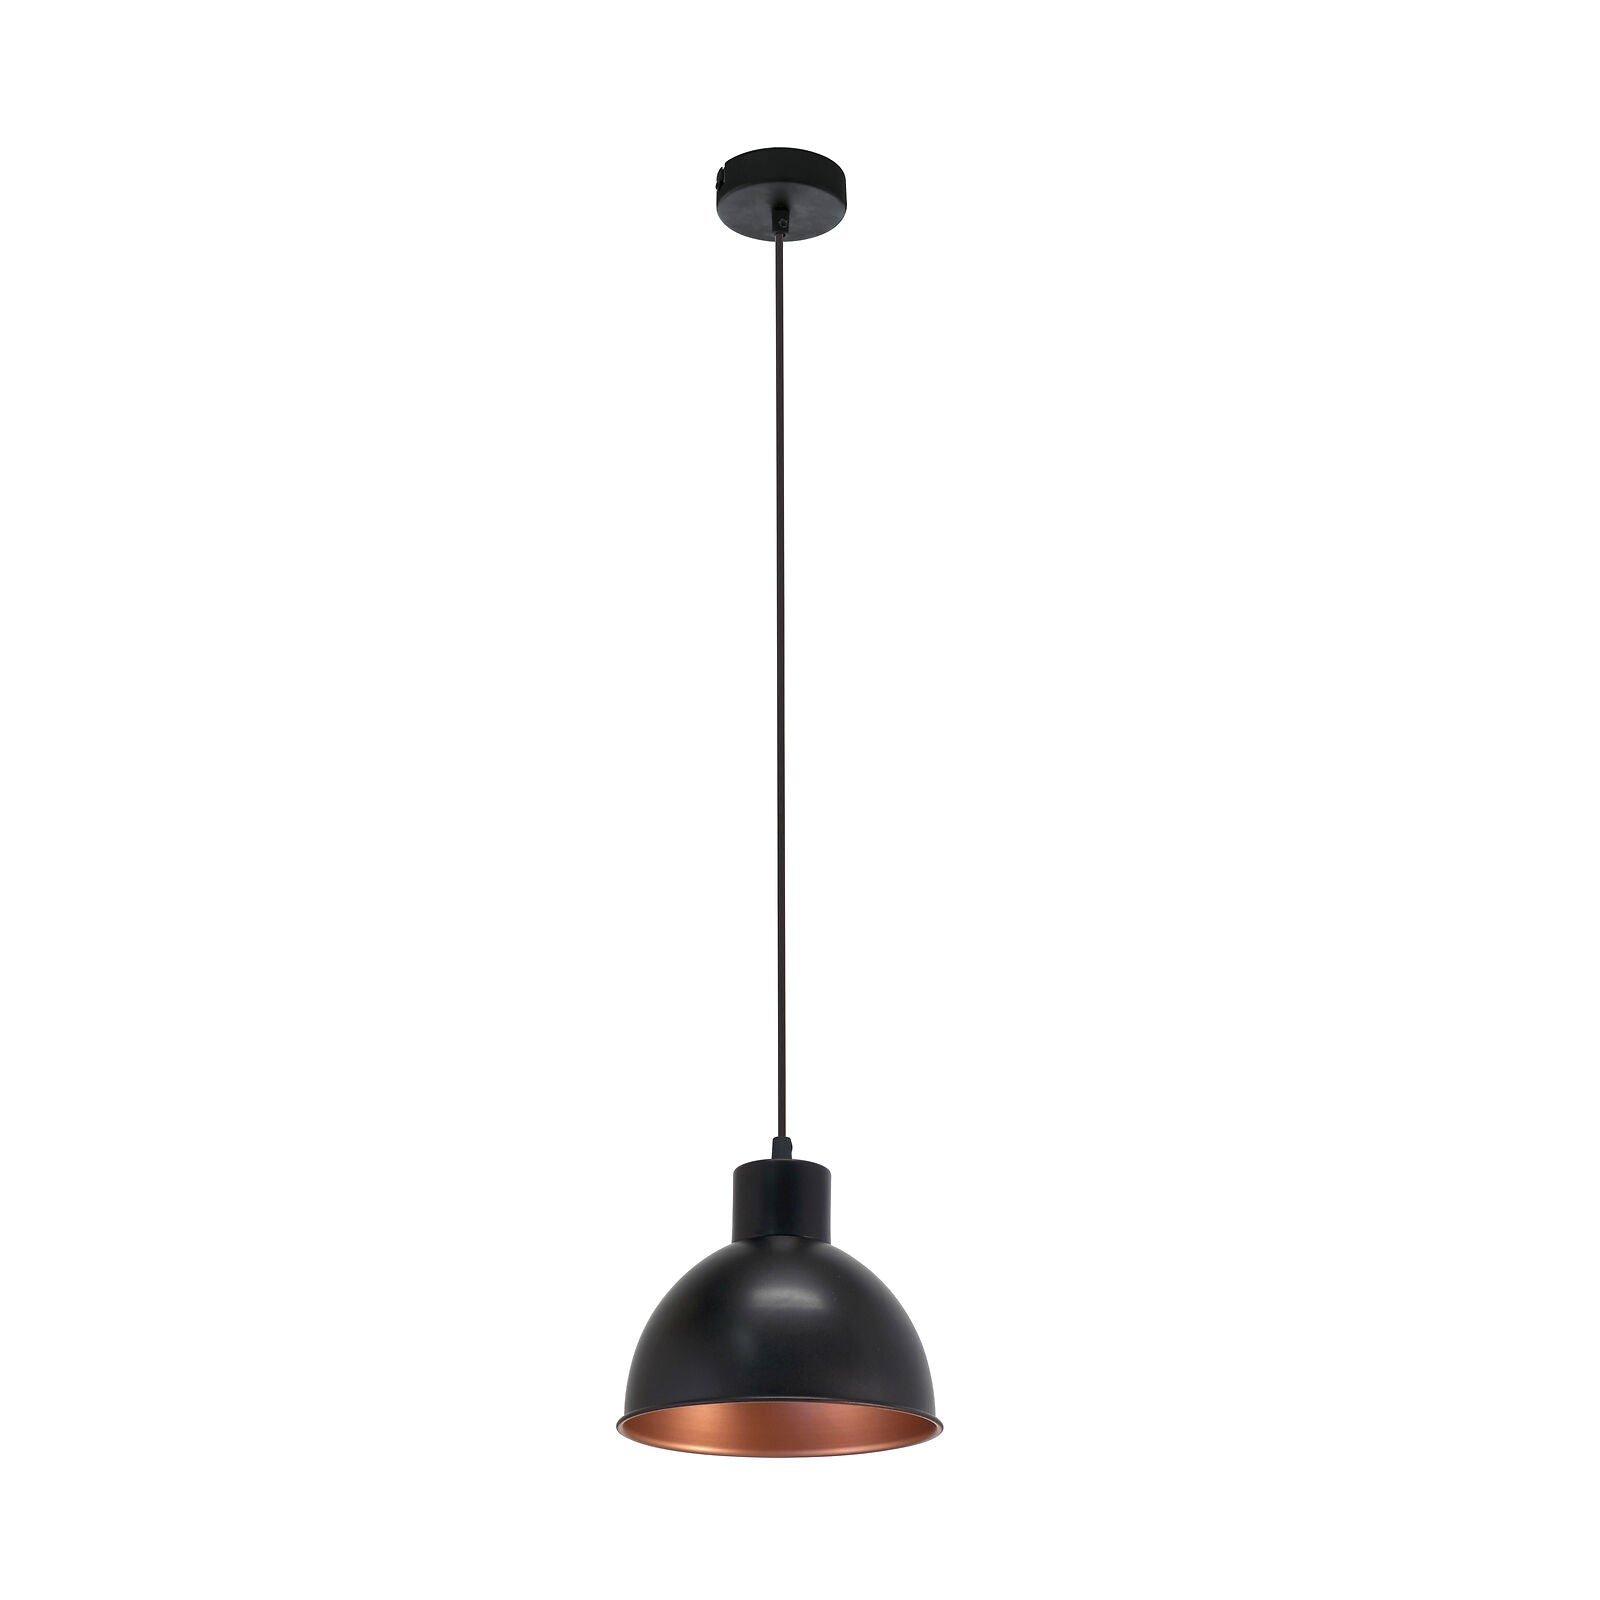 Hanging Ceiling Pendant Light Black & Copper Industrial Shade 1 x 60W E27 Bulb